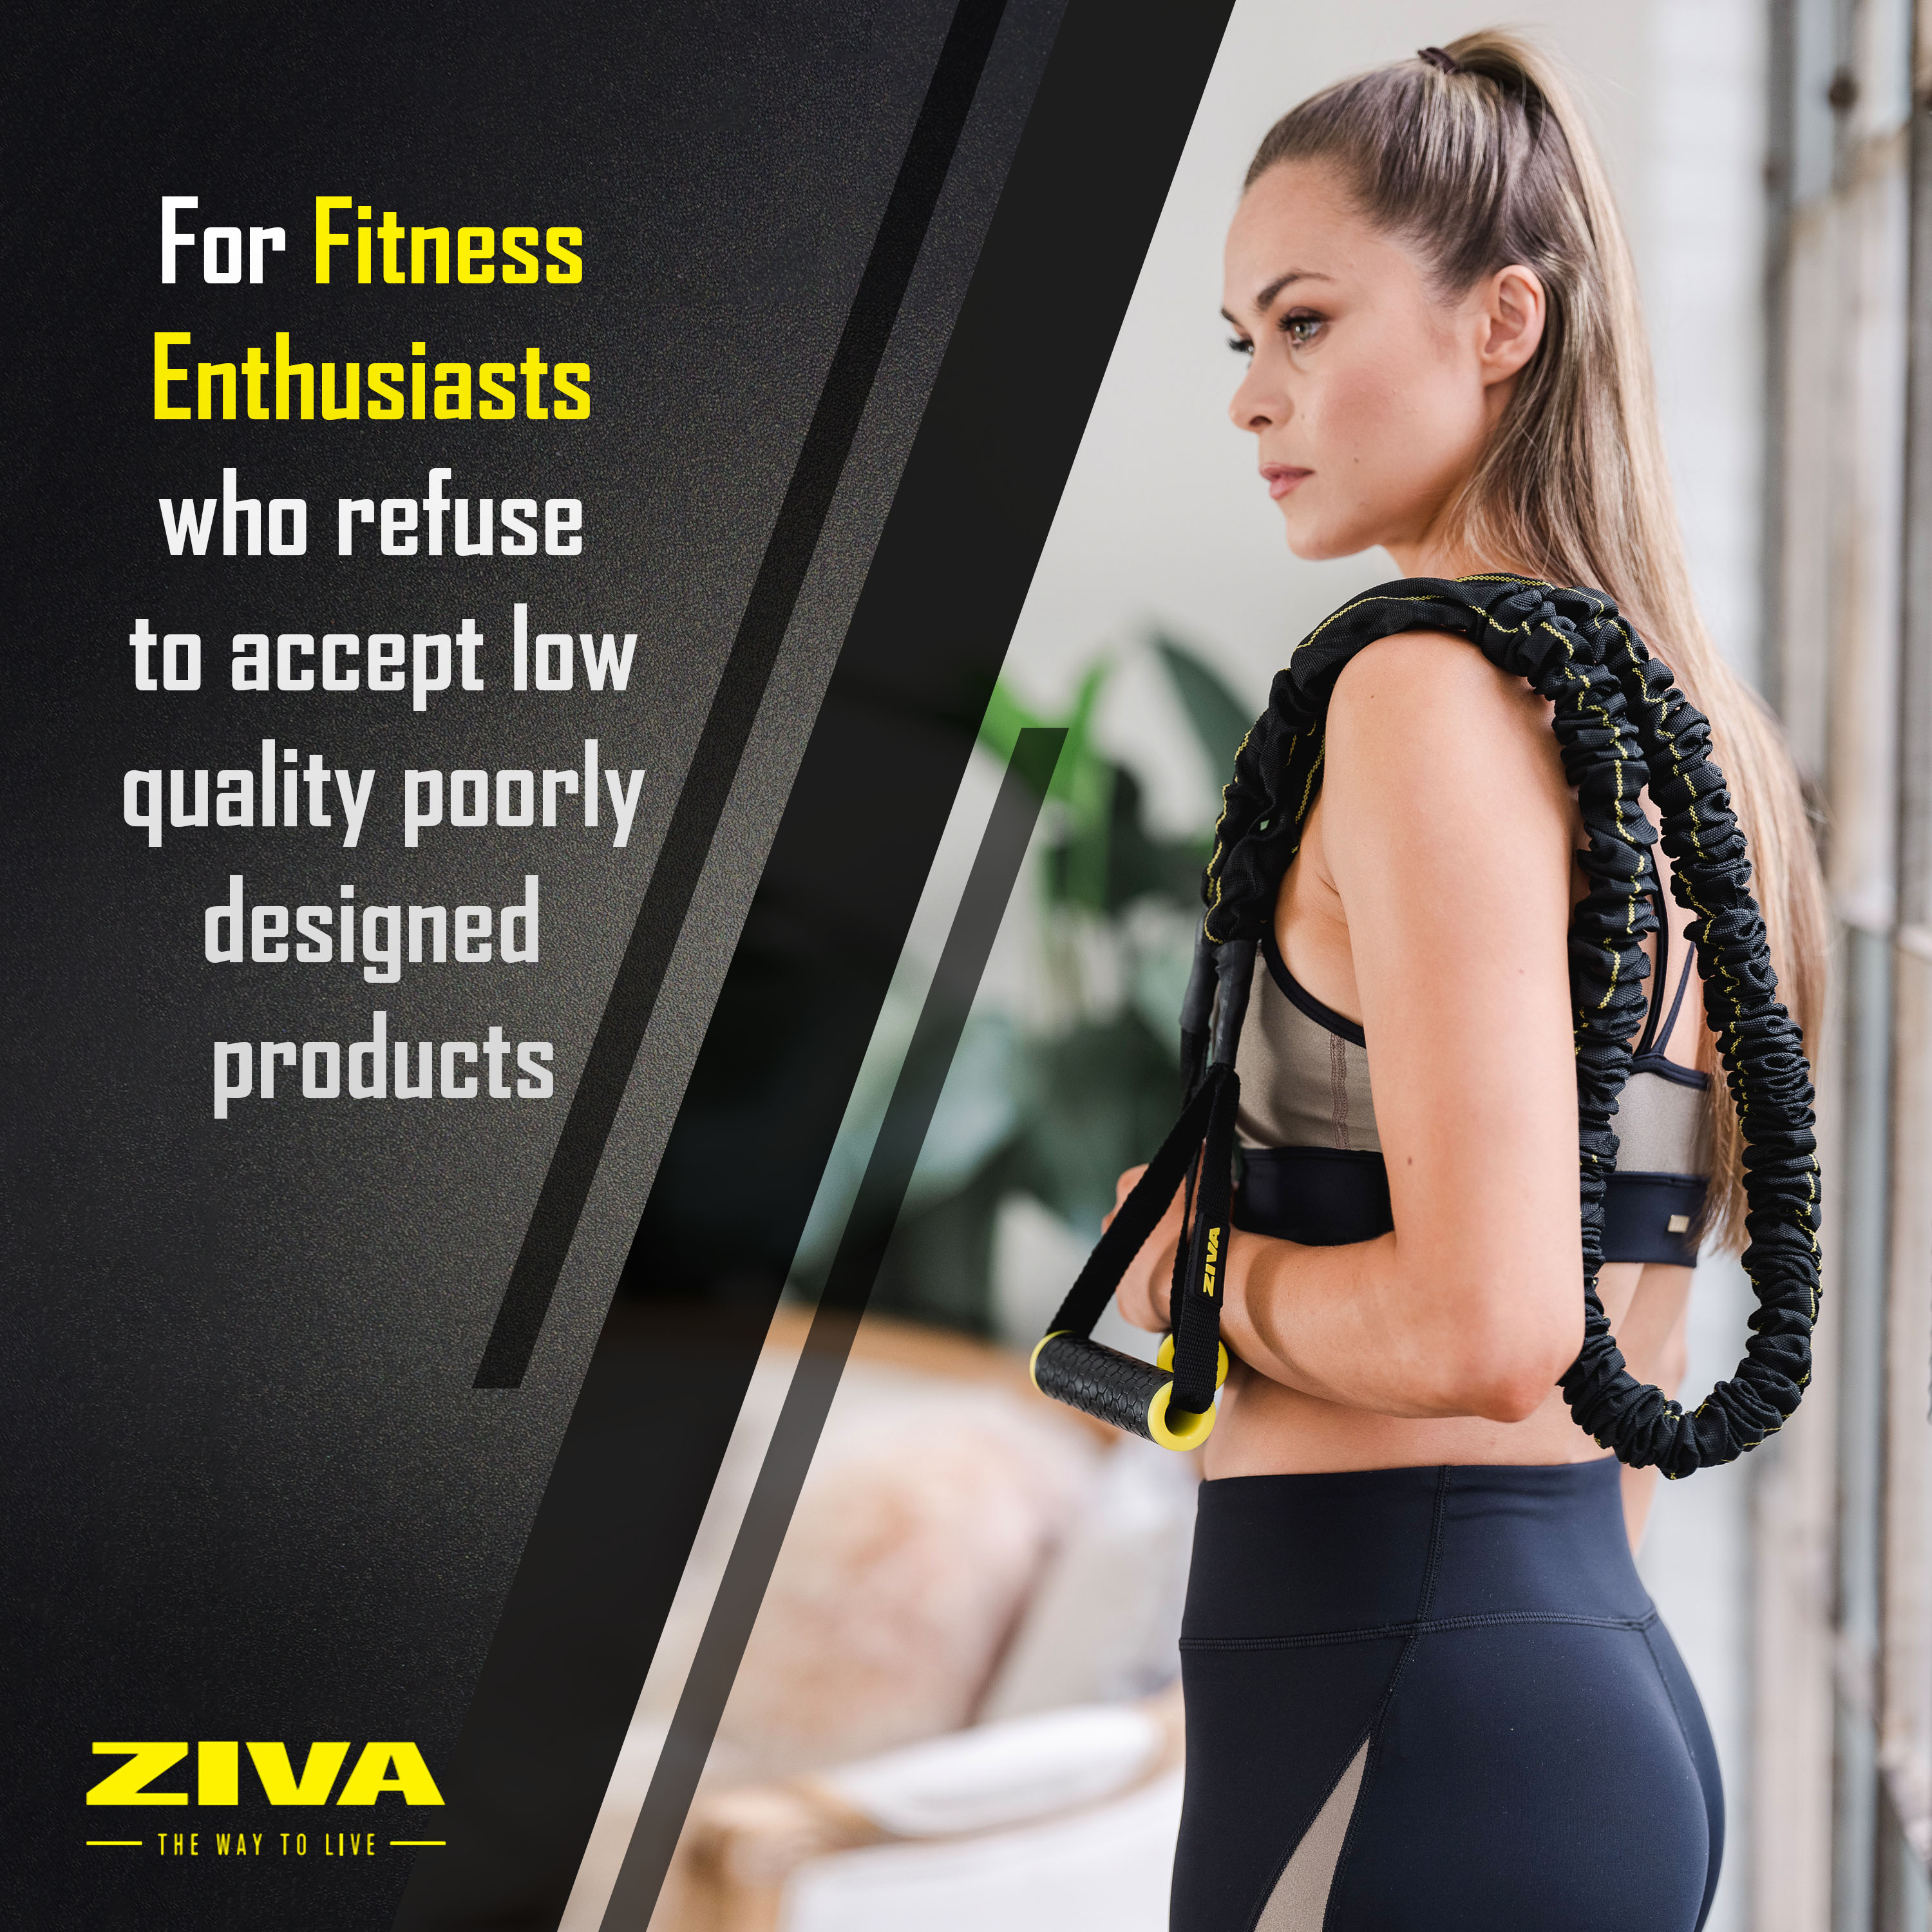 For fitness enthusiasts who refuse to accept low quality, poorly designed products.